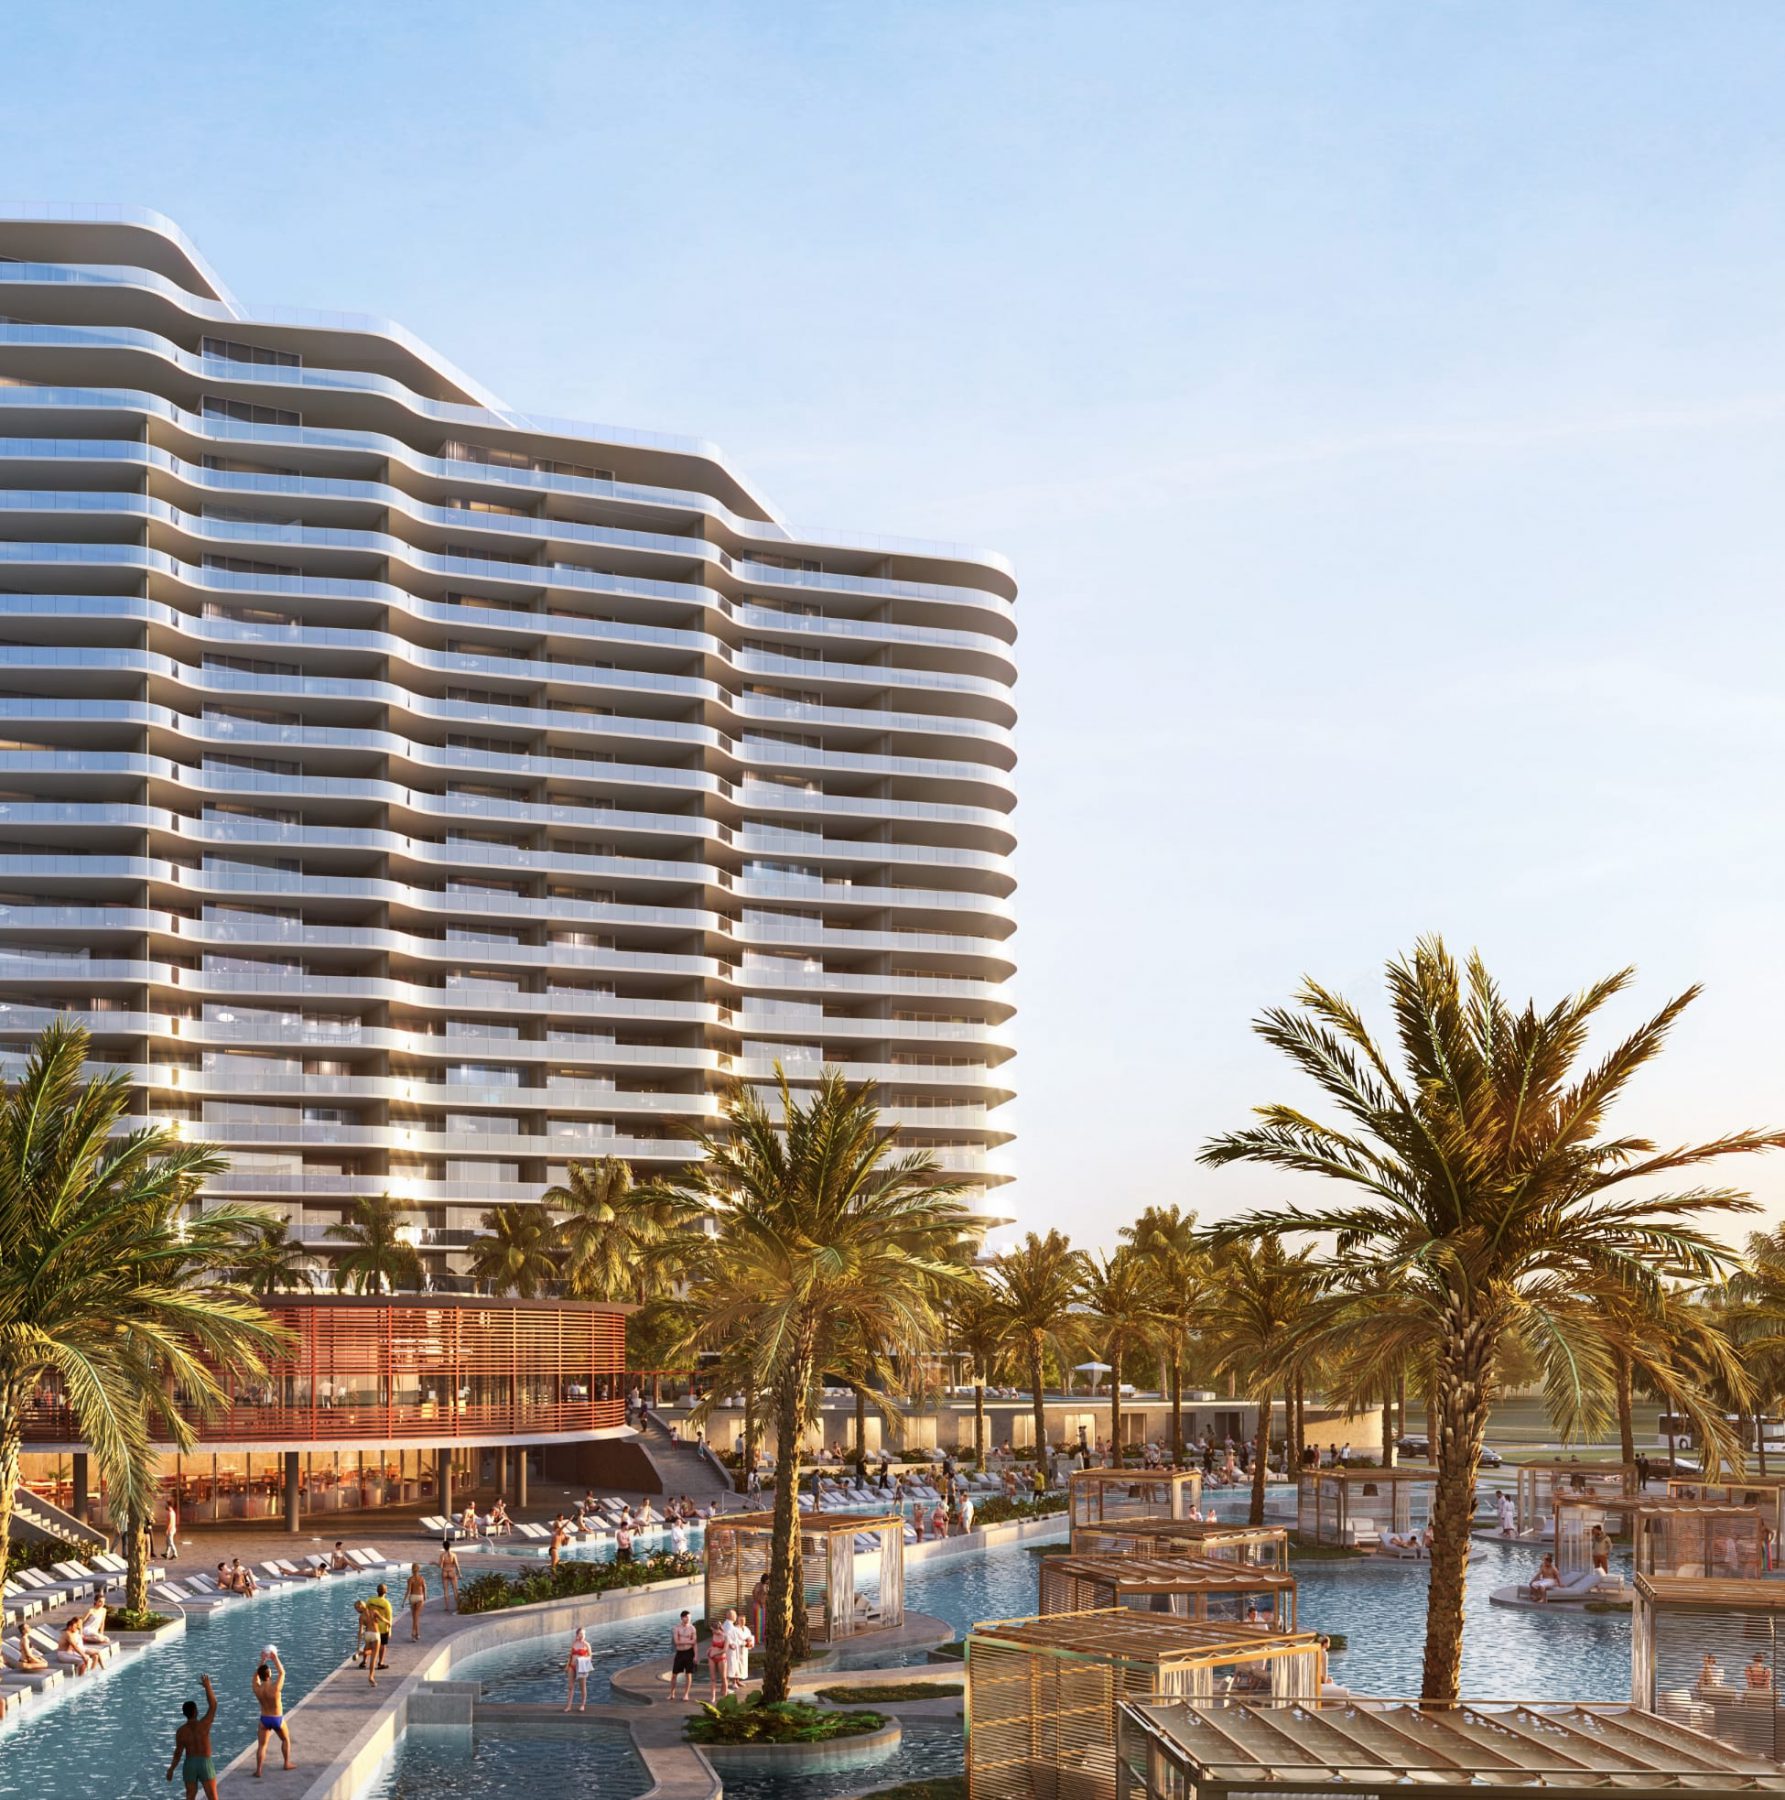 An exterior rendering of South Tower of The Ritz-Carlton Residences, Estero Bay, overlooking the pool bar and lounge of The Oasis